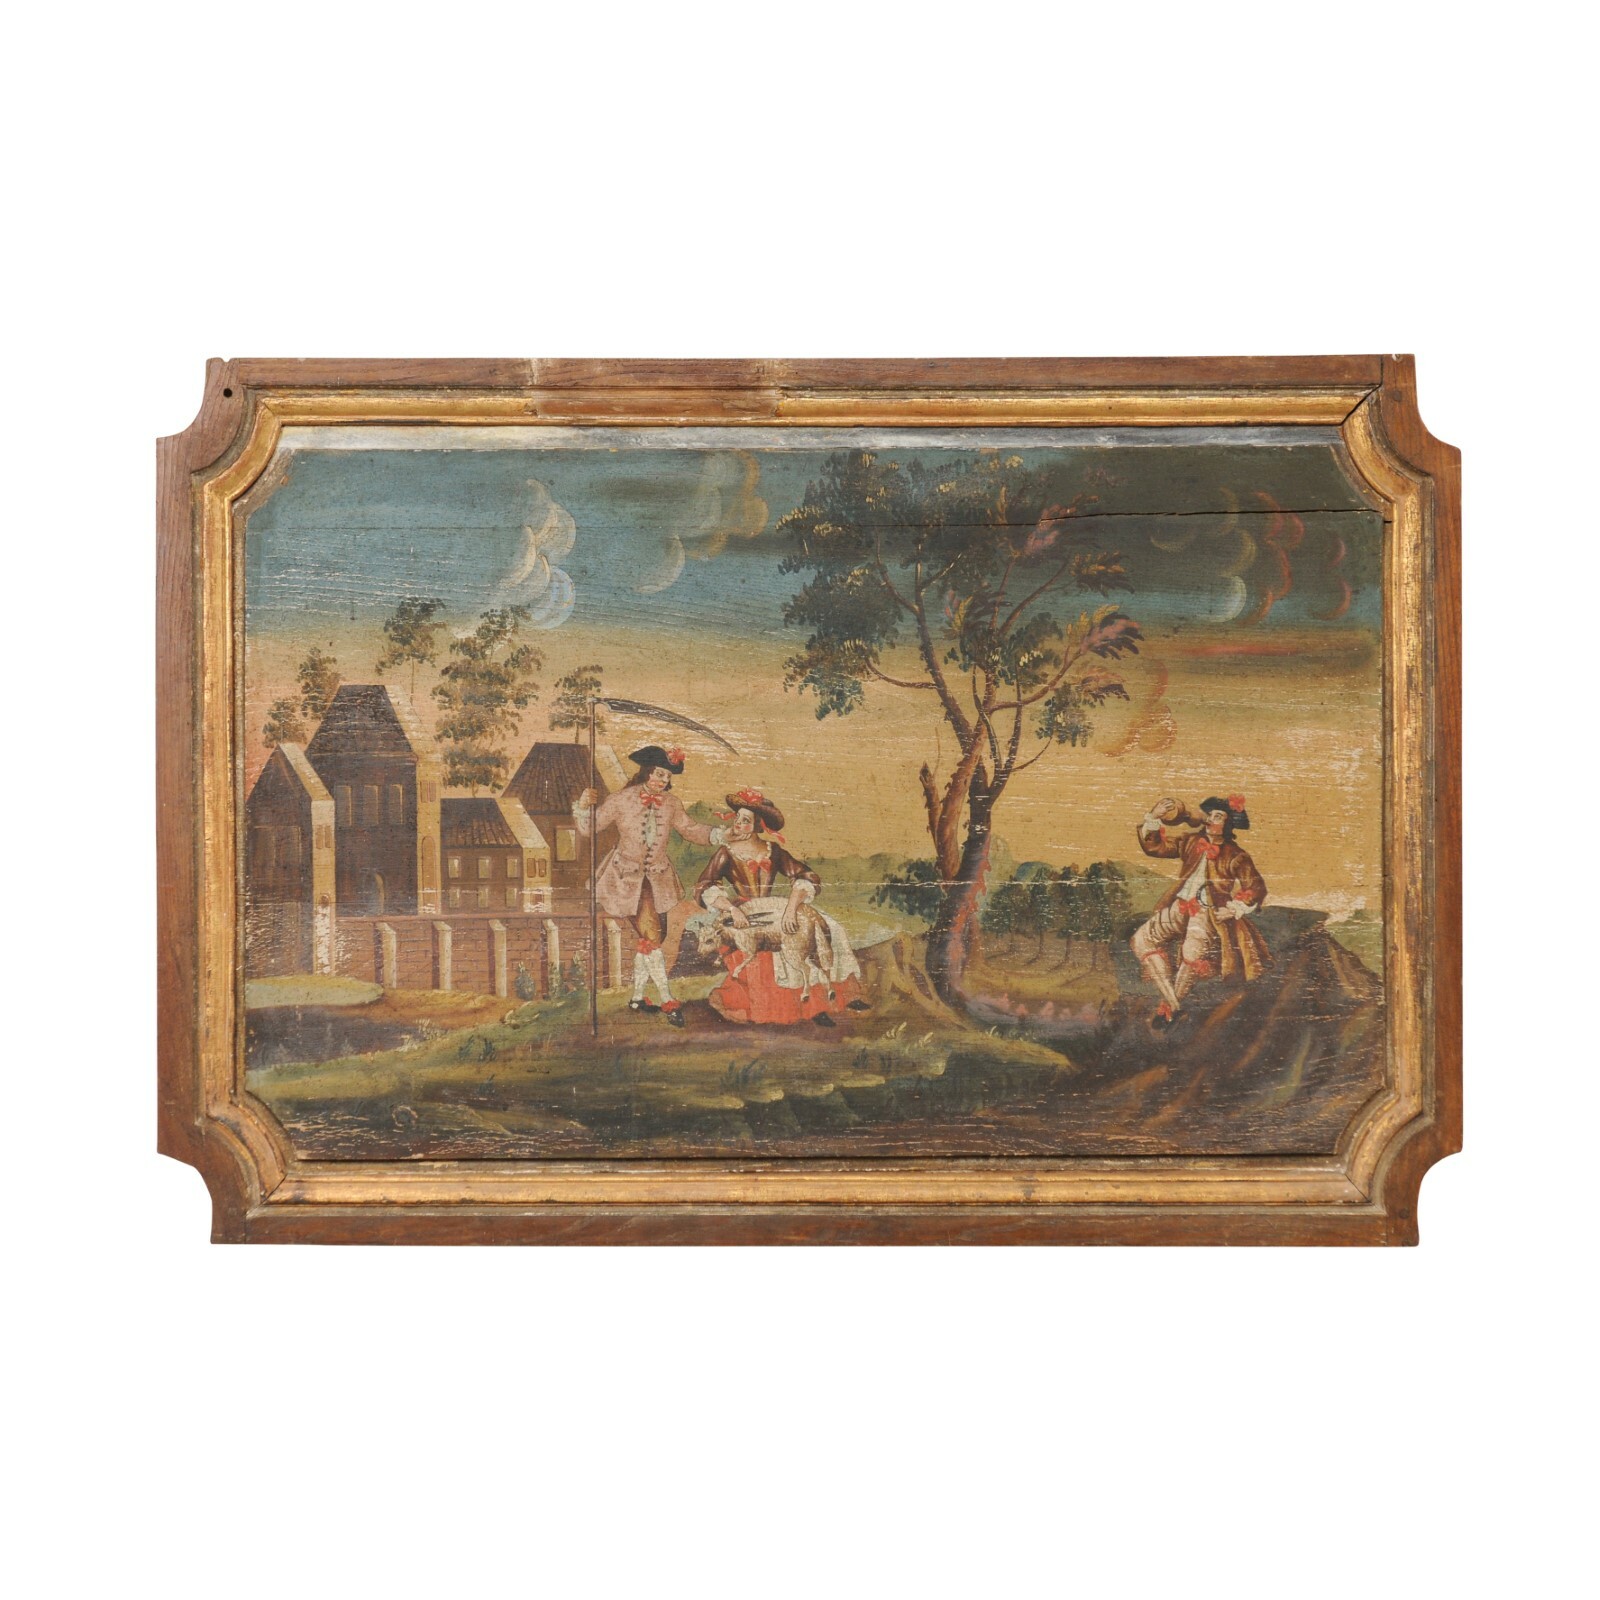 19th C. French Landscape on Wooden Plaque